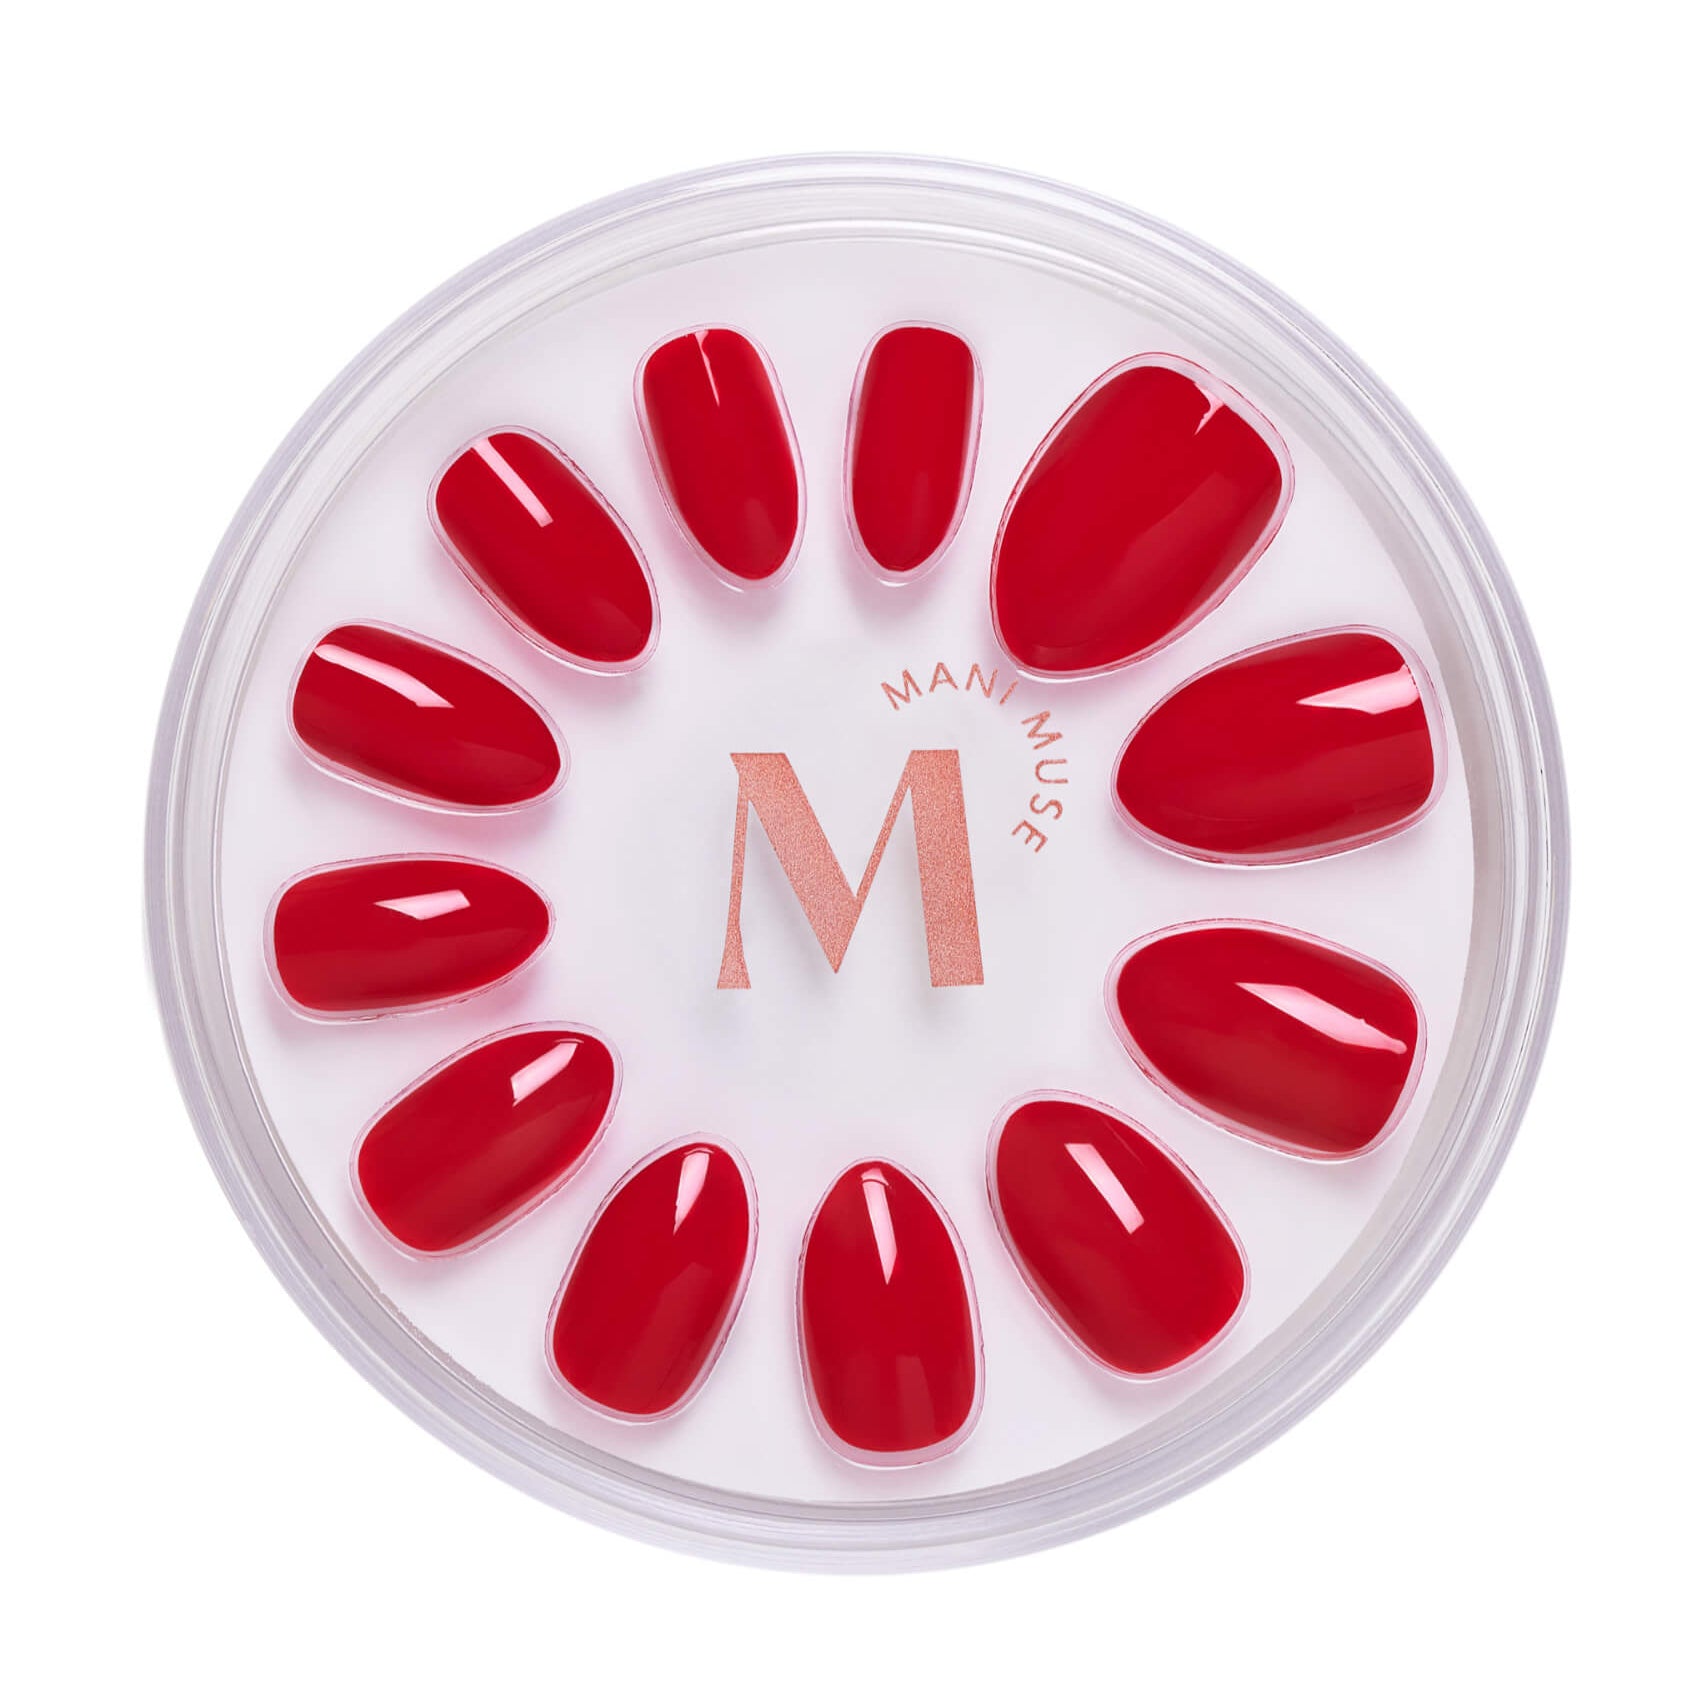 Mani Muse Caught Red Handed Press-on Nails - Almond